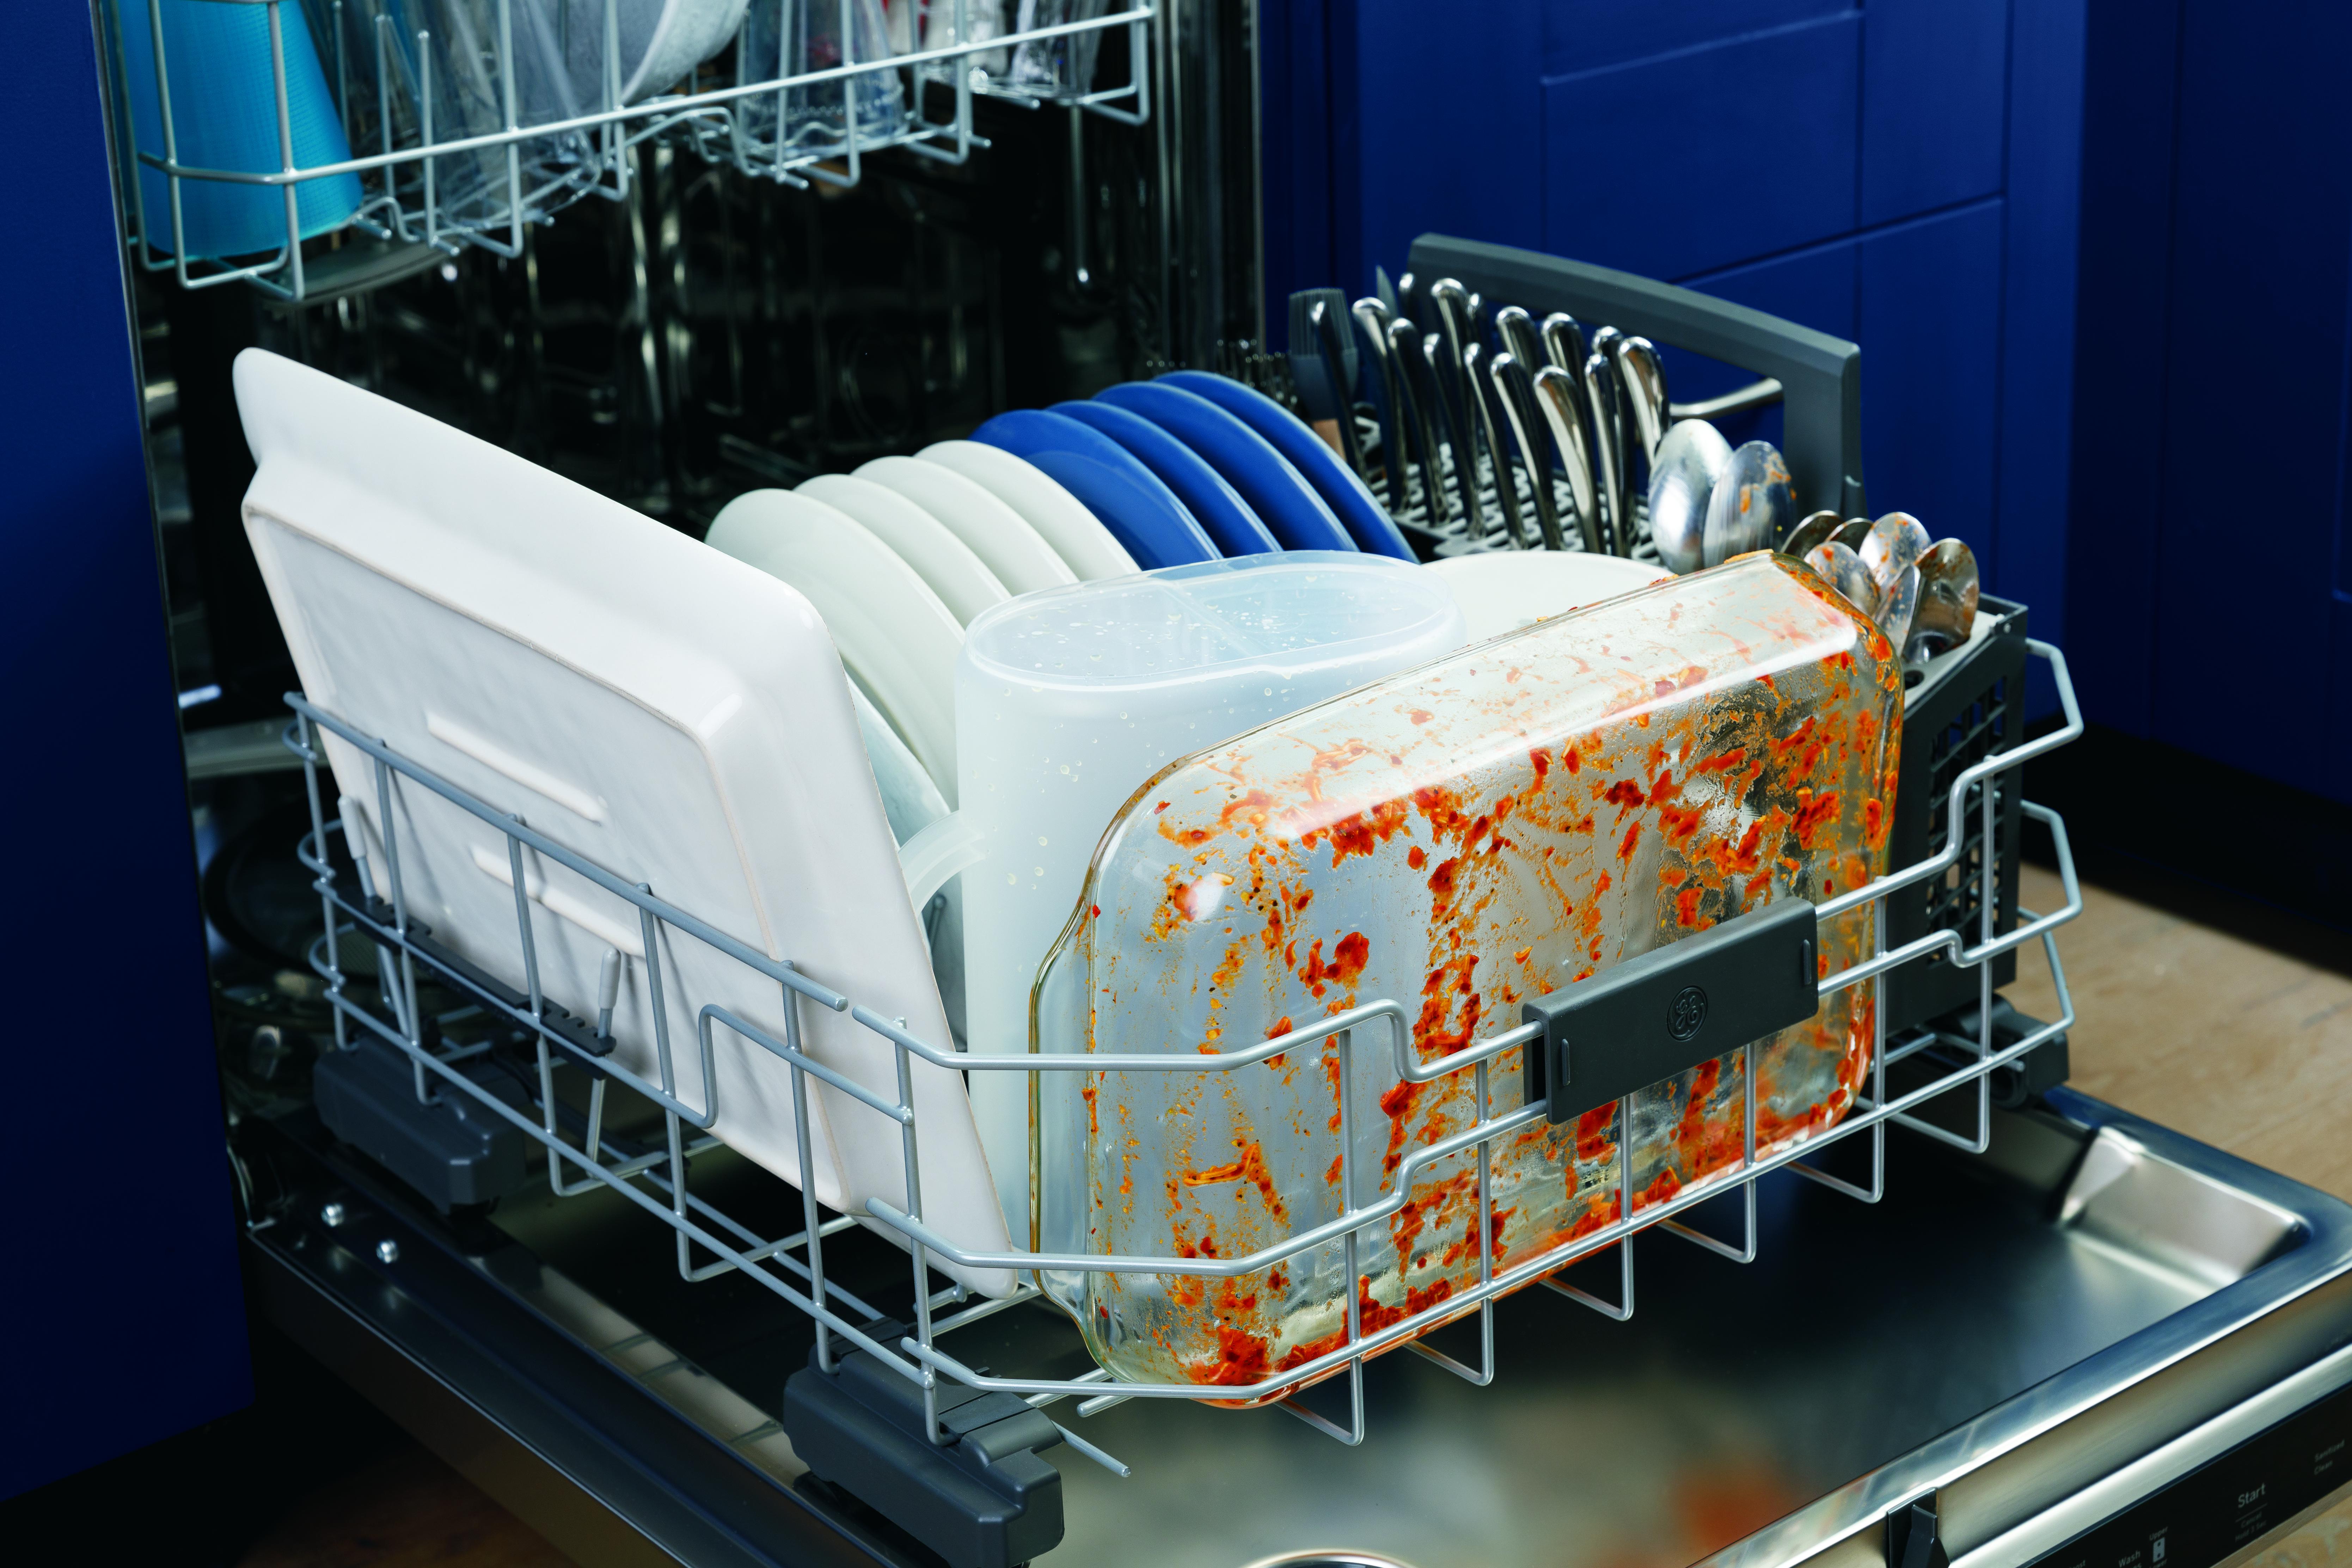 City Furniture & Appliances - Bosch Dishwasher racks offer the most options  for customization. The FlexSpace™ design allows the folding of every other  tine, providing more spaces for items like frying pans